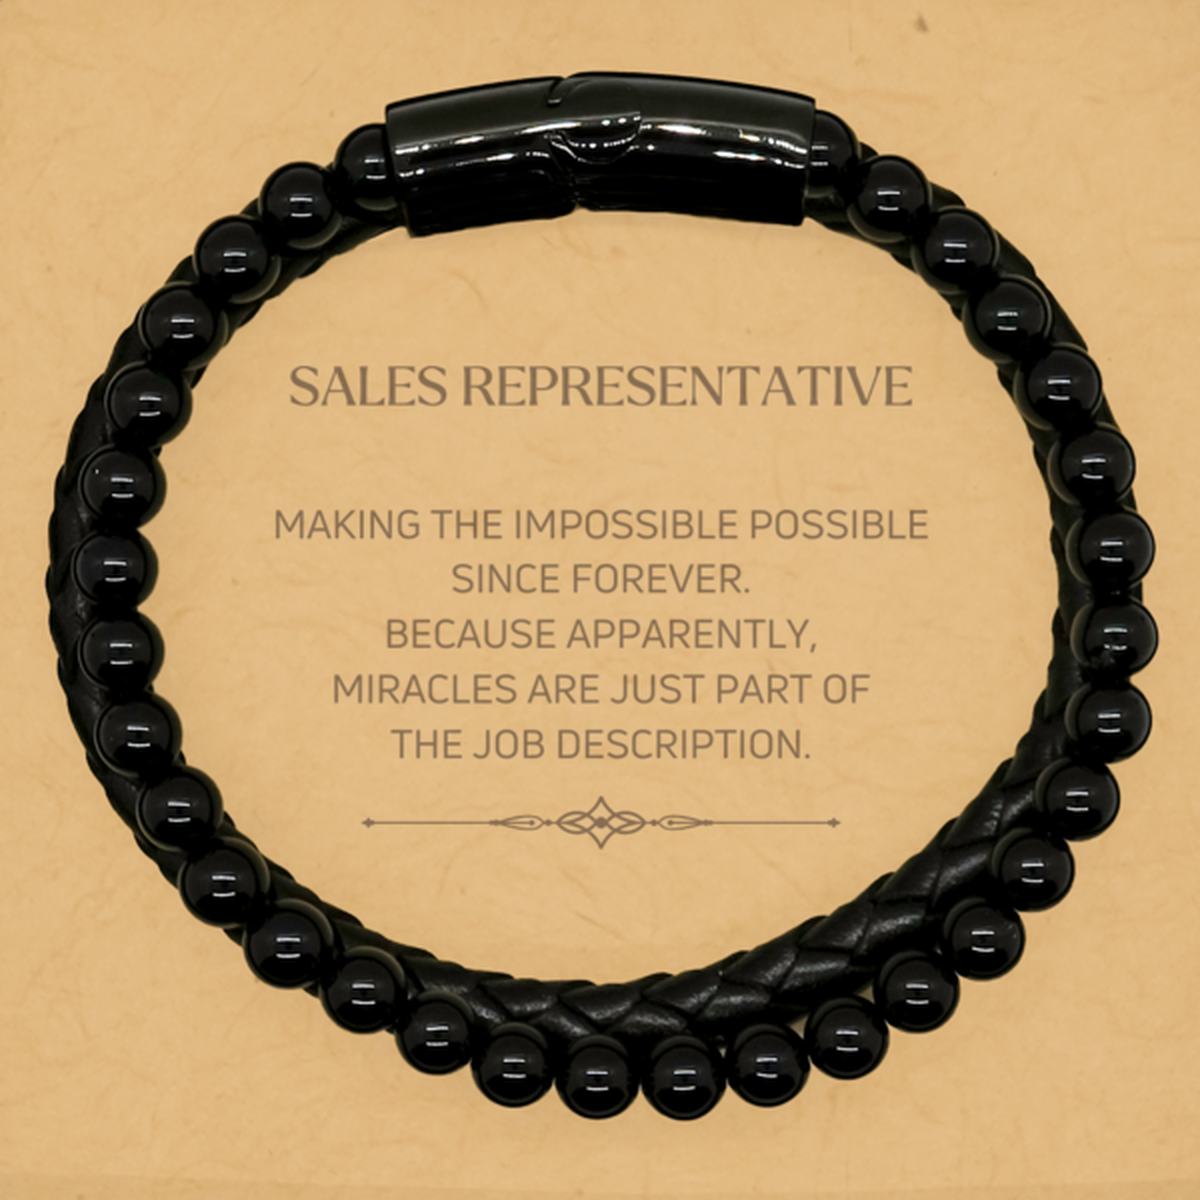 Funny Sales Representative Gifts, Miracles are just part of the job description, Inspirational Birthday Stone Leather Bracelets For Sales Representative, Men, Women, Coworkers, Friends, Boss